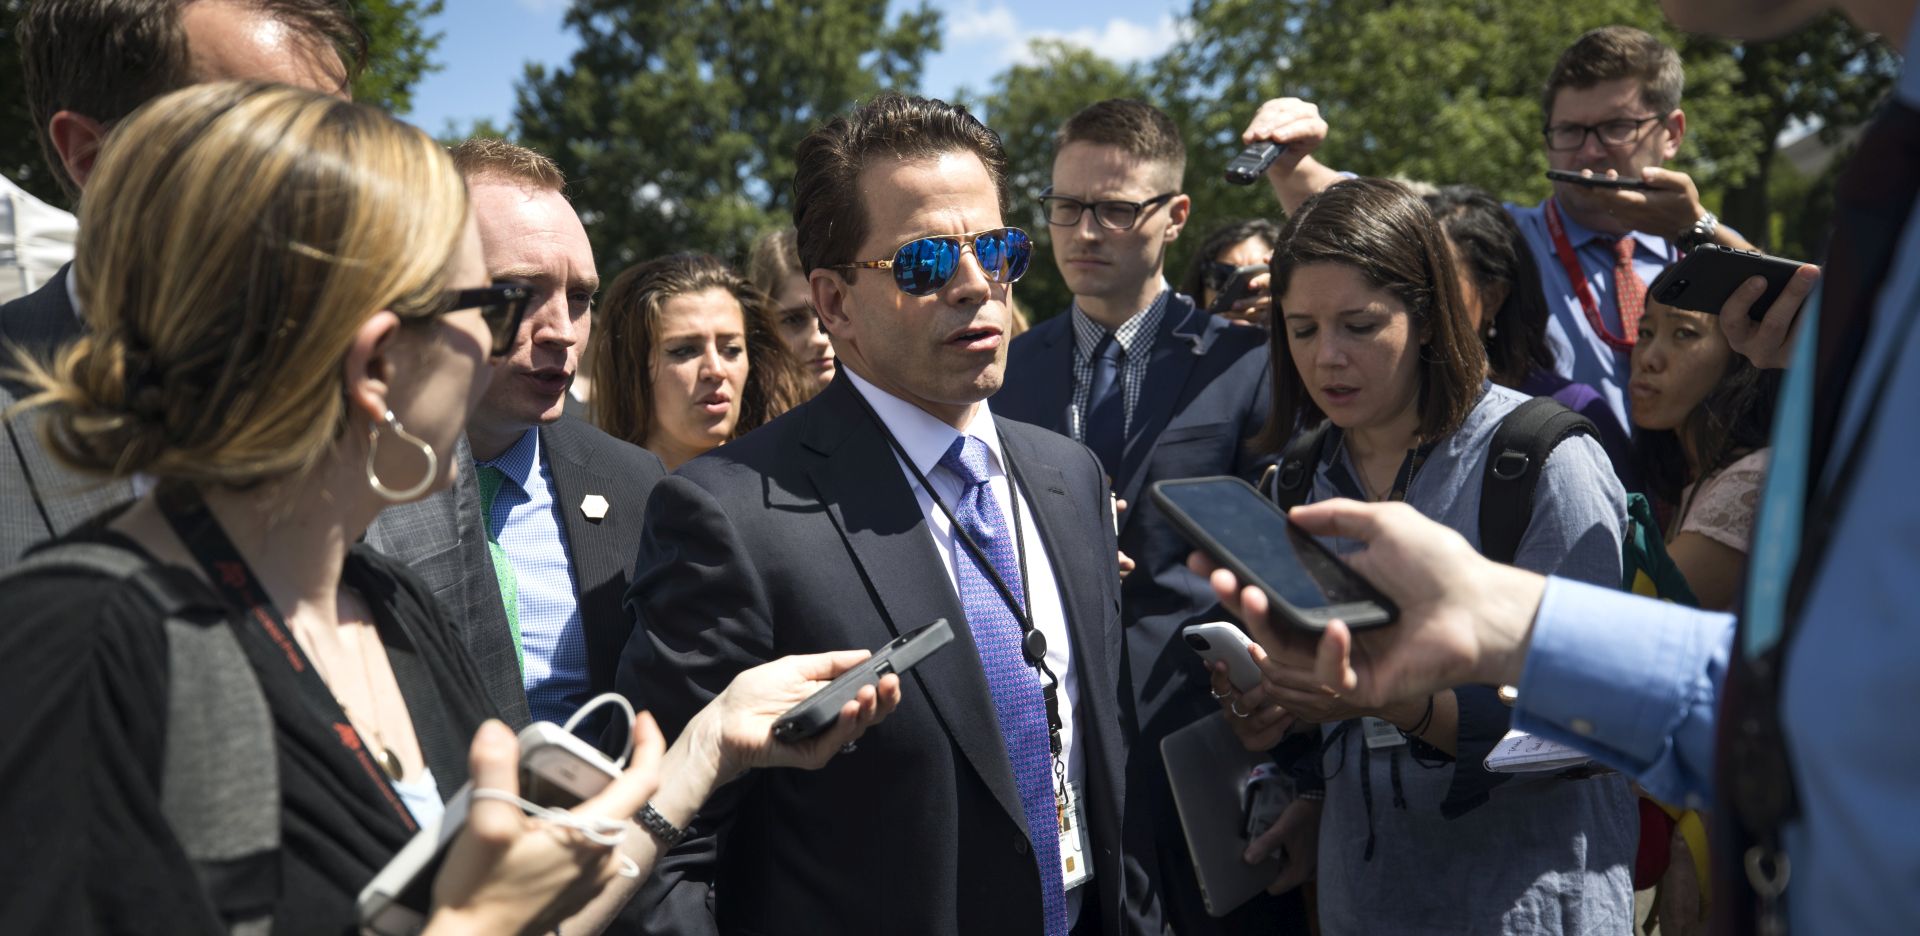 epa06108813 Anthony Scaramucci (C), US President Donald Trump's new communication's director, speaks to reporters about firing White House aides to stop leaks to the press outside the West Wing of the White House in Washington, DC, USA, 25 July 2017. Scaramucci also spoke about Trump's increasingly testy relationship with Attorney General Jeff Sessions.  EPA/JIM LO SCALZO